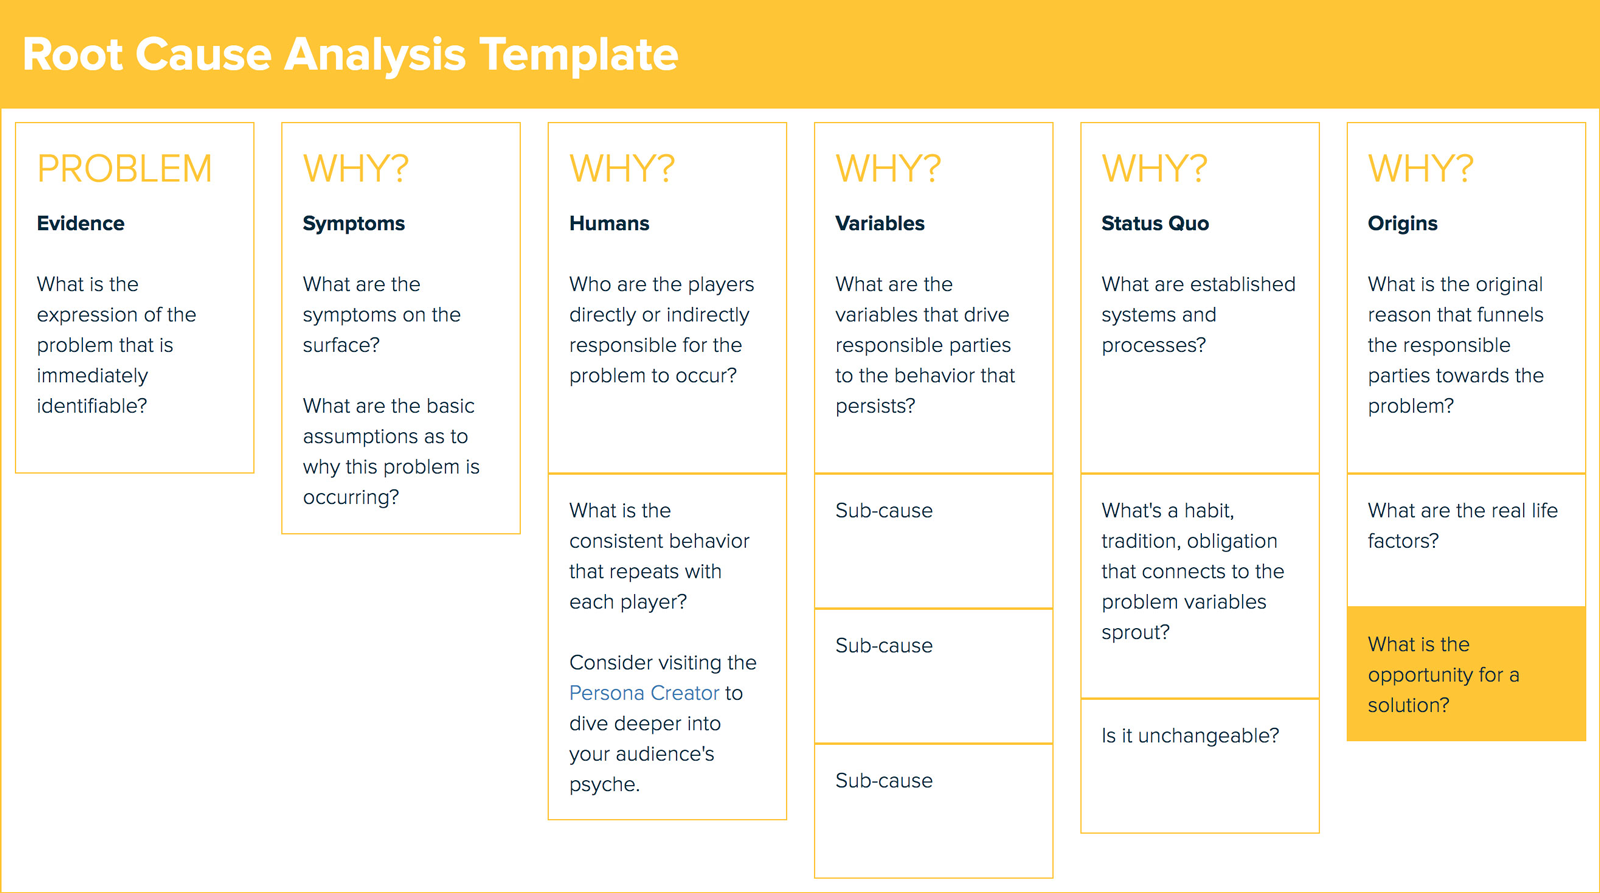 Root Cause Analysis Template: Free Download, Edit, Fill, Create 